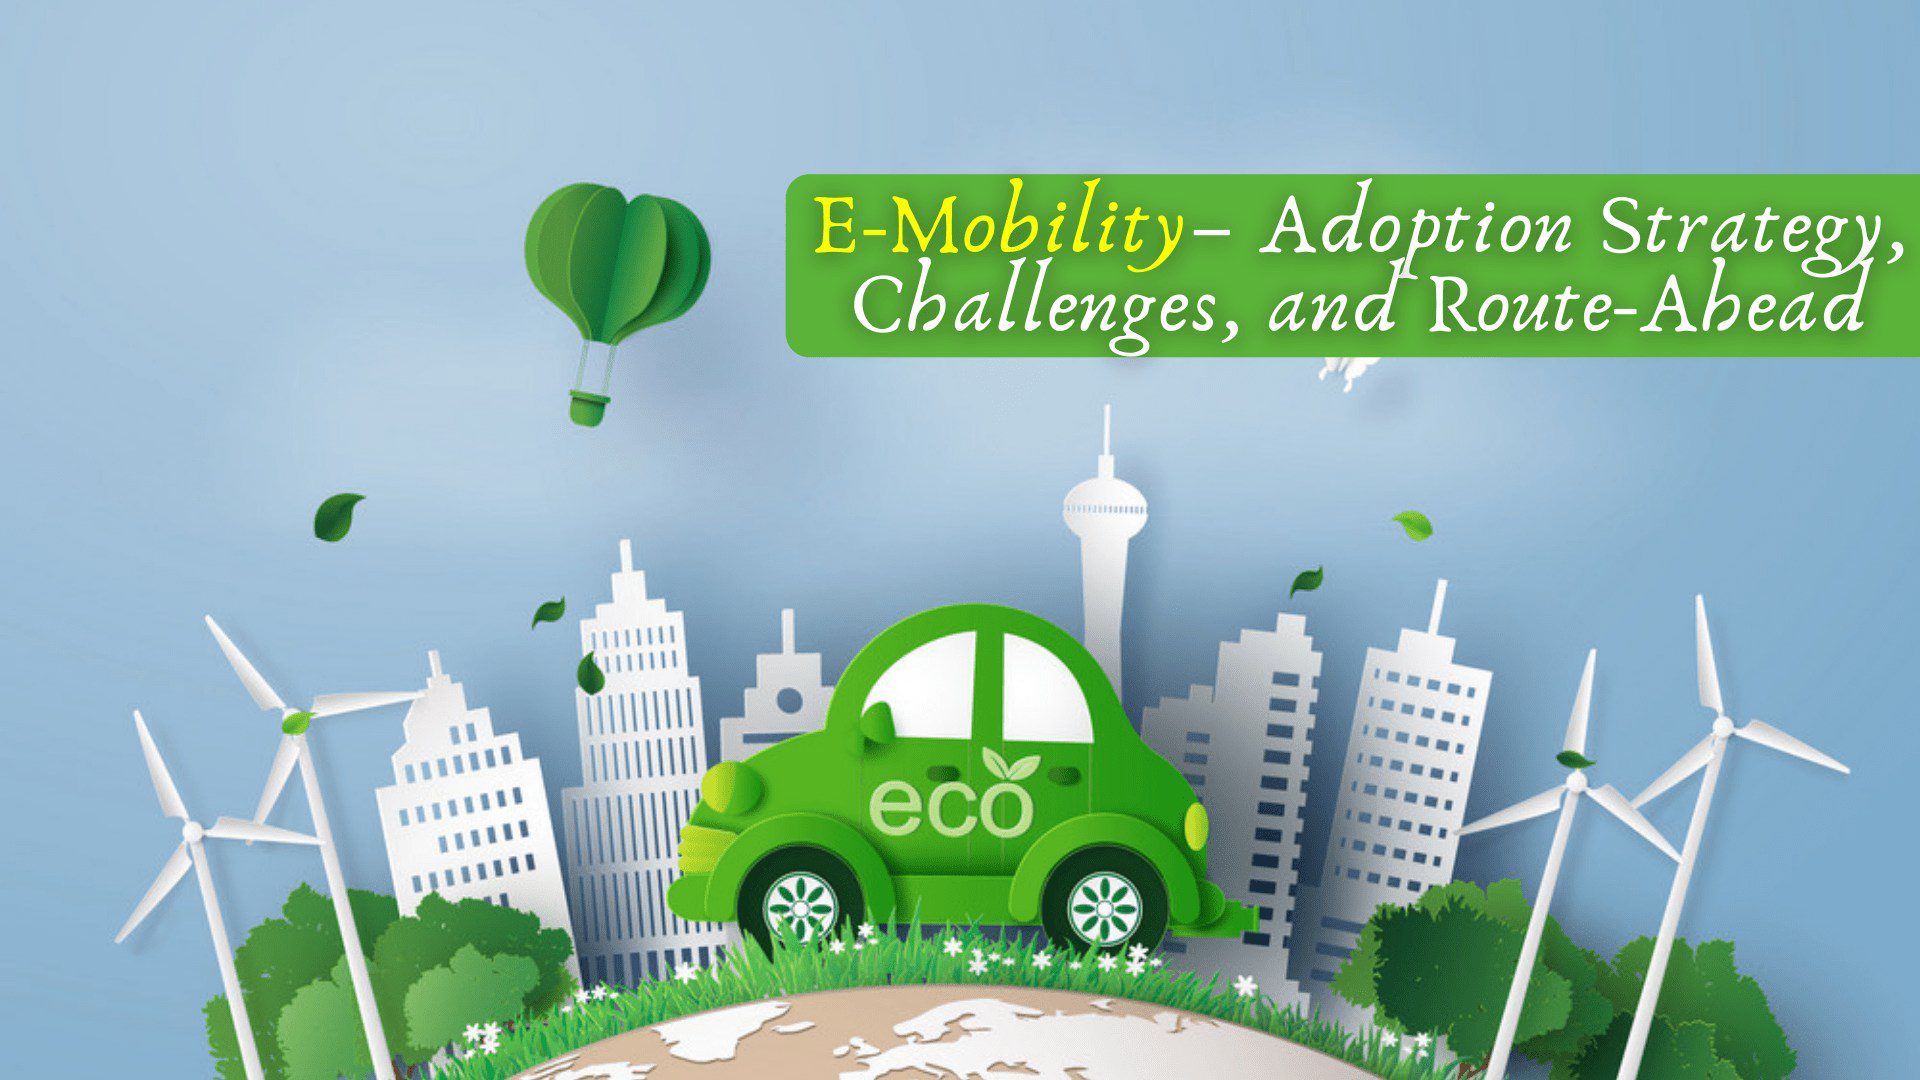 https://evzon.in/e-mobility-adoption-strategy-challenges/